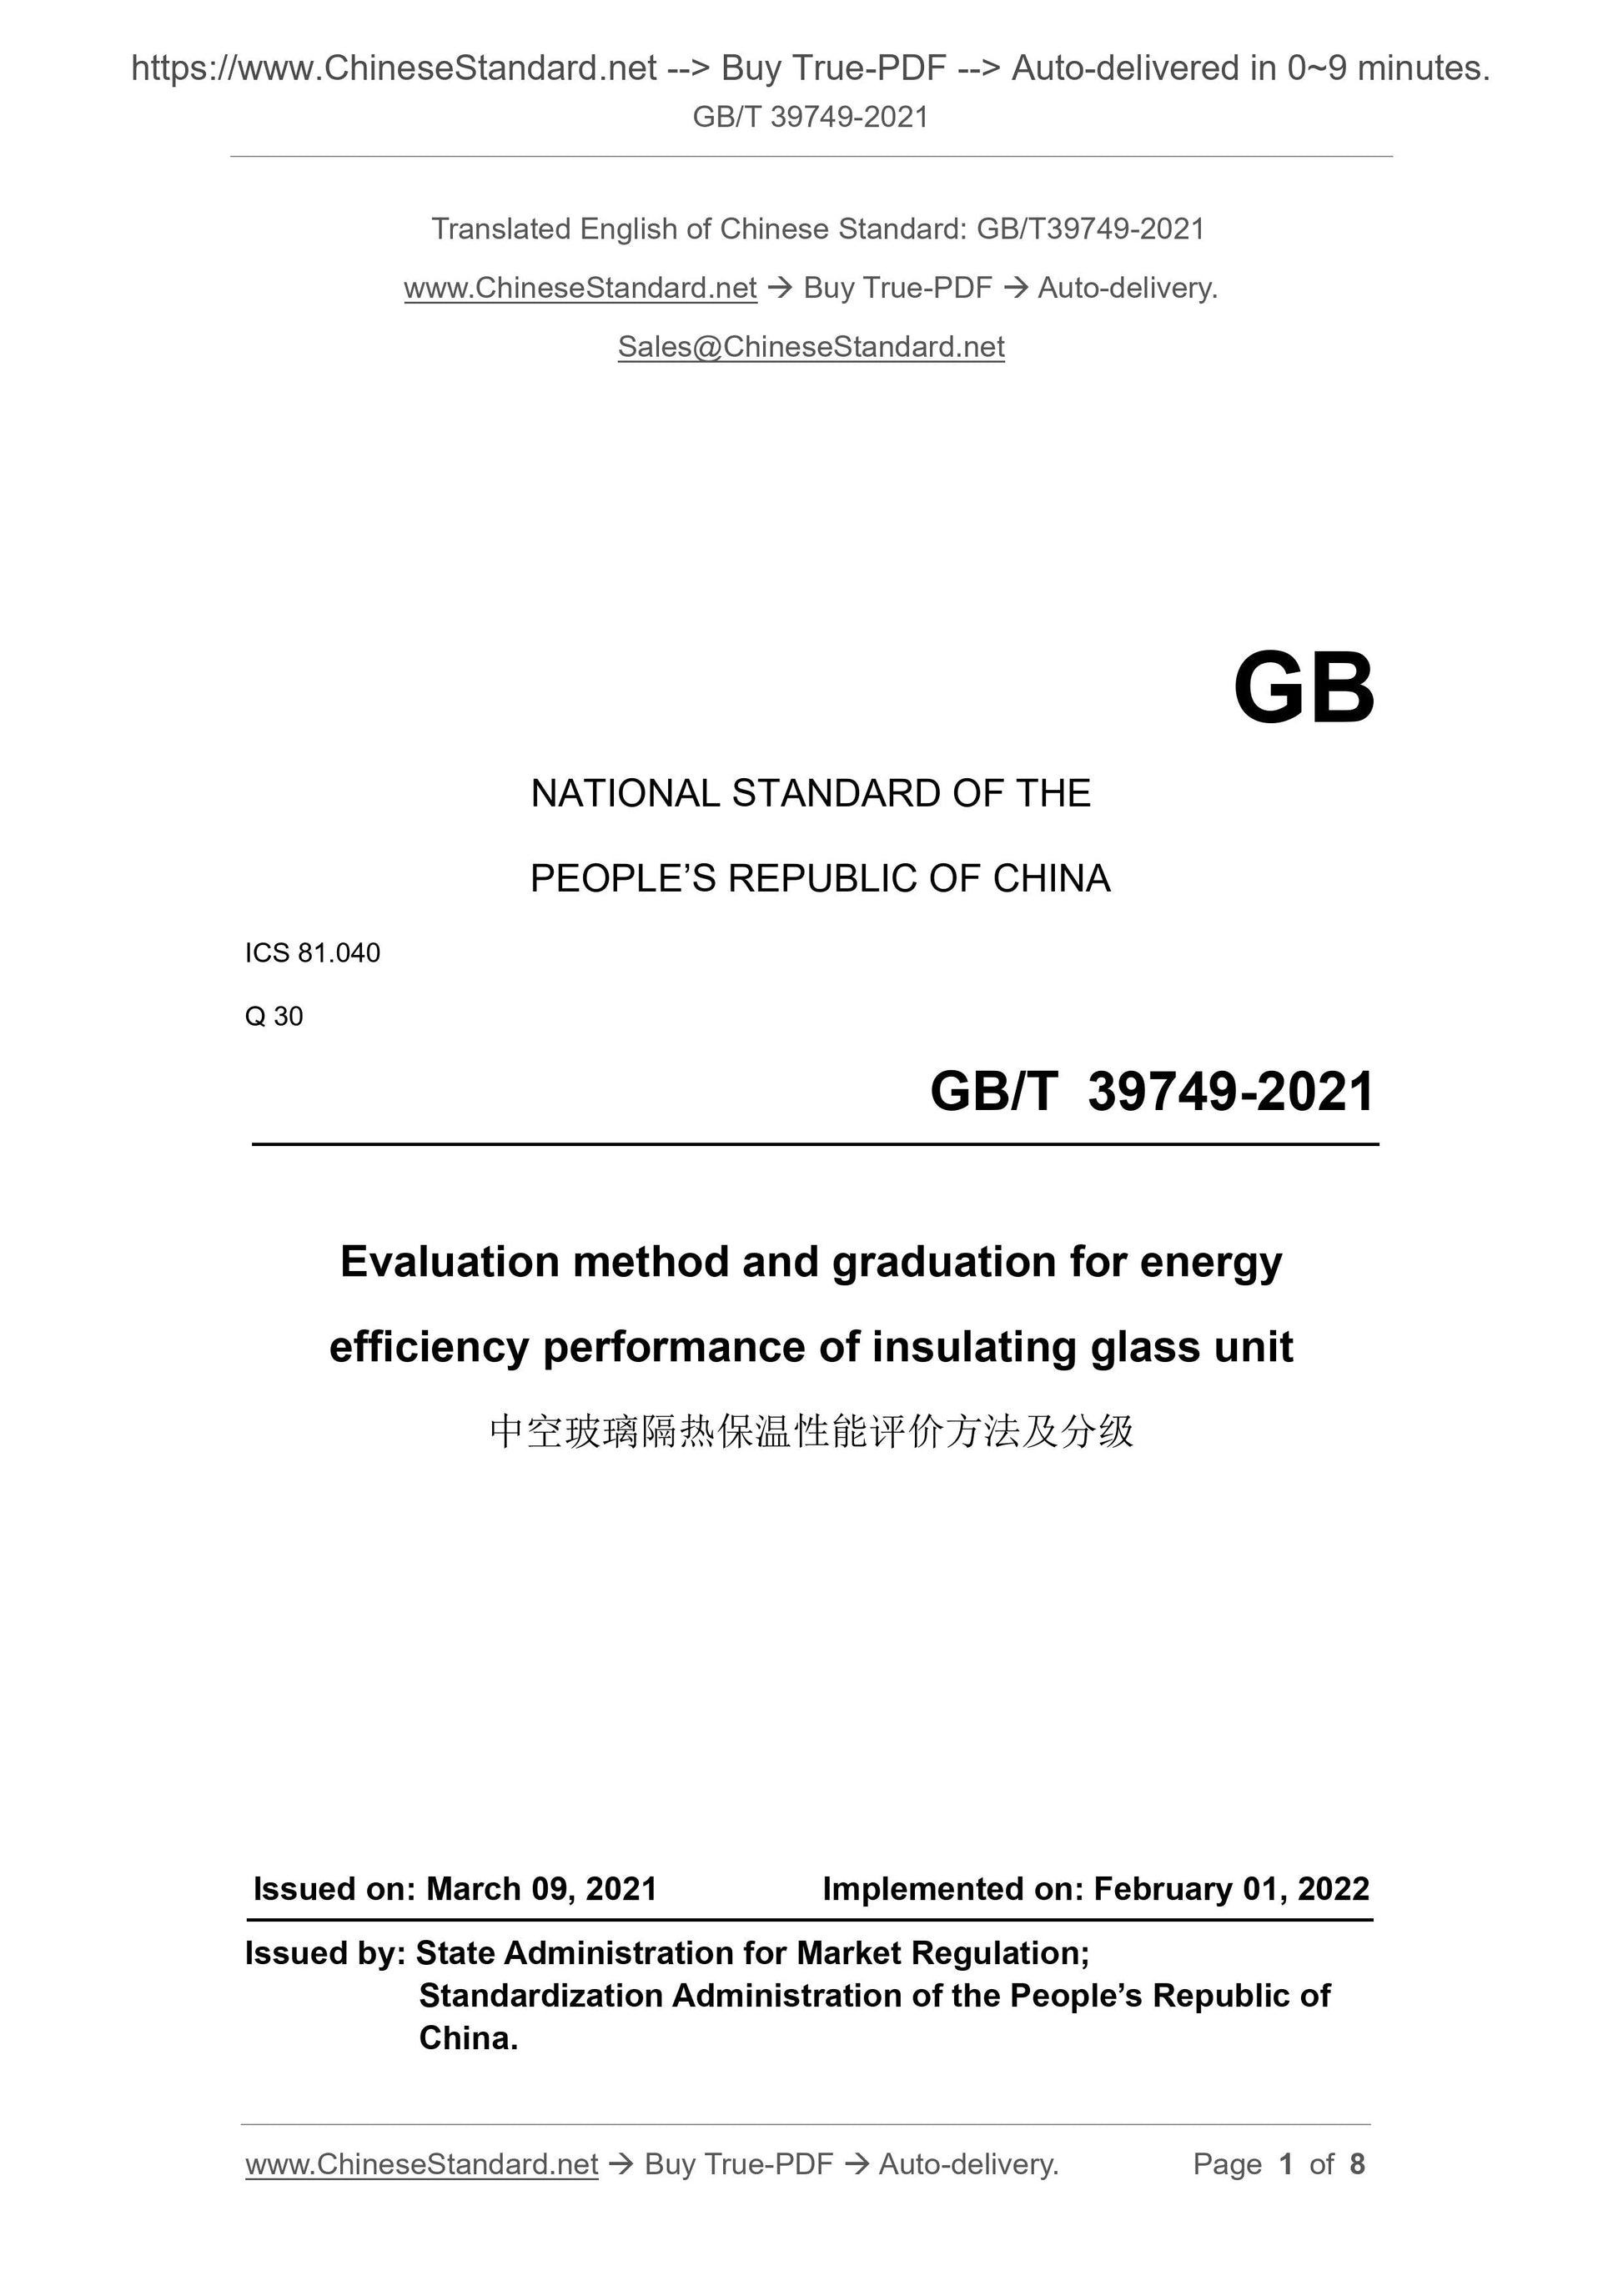 GB/T 39749-2021 Page 1